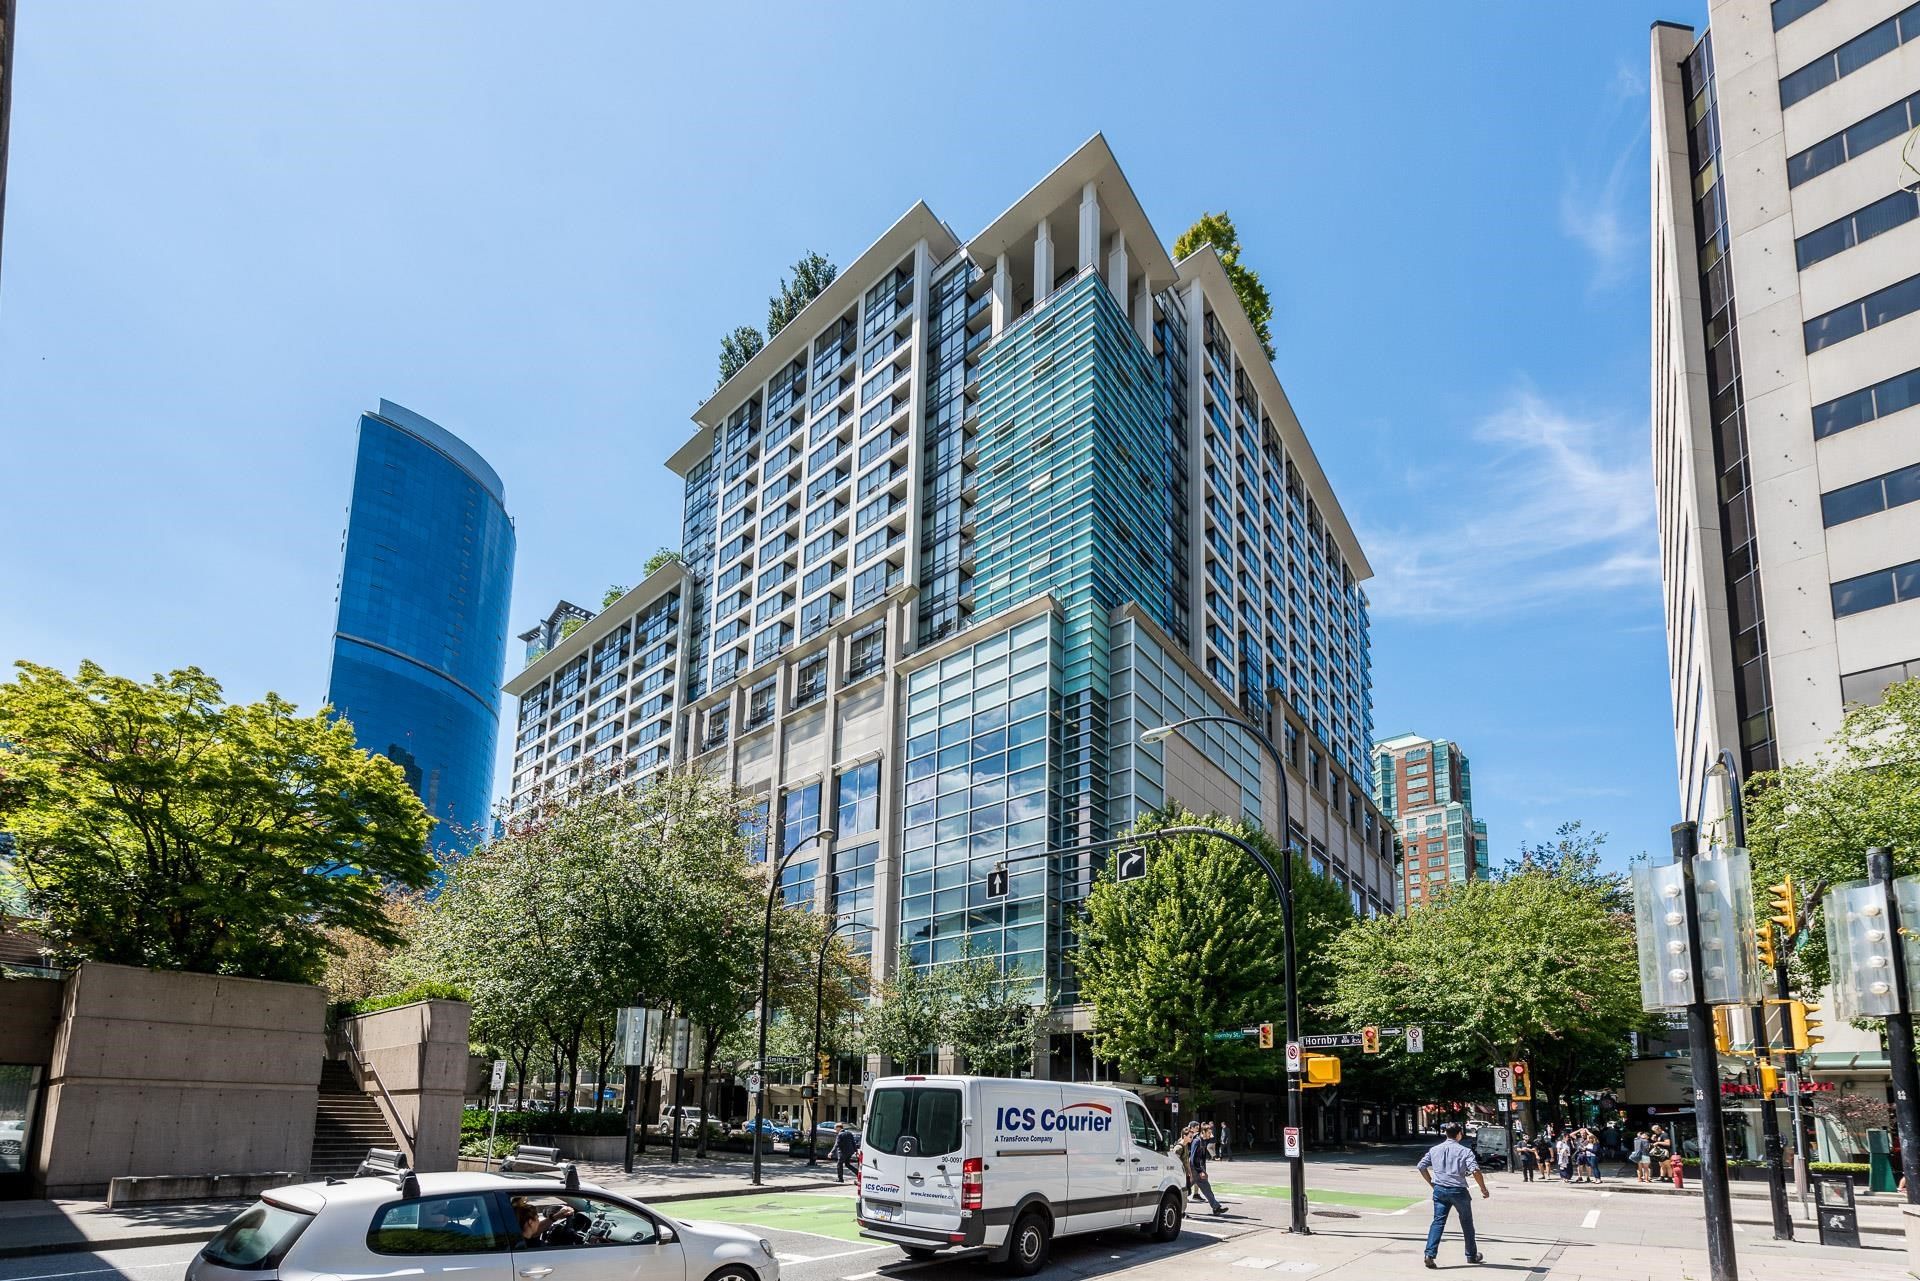 Main Photo: 1317 938 SMITHE STREET in Vancouver: Downtown VW Condo for sale (Vancouver West)  : MLS®# R2628485